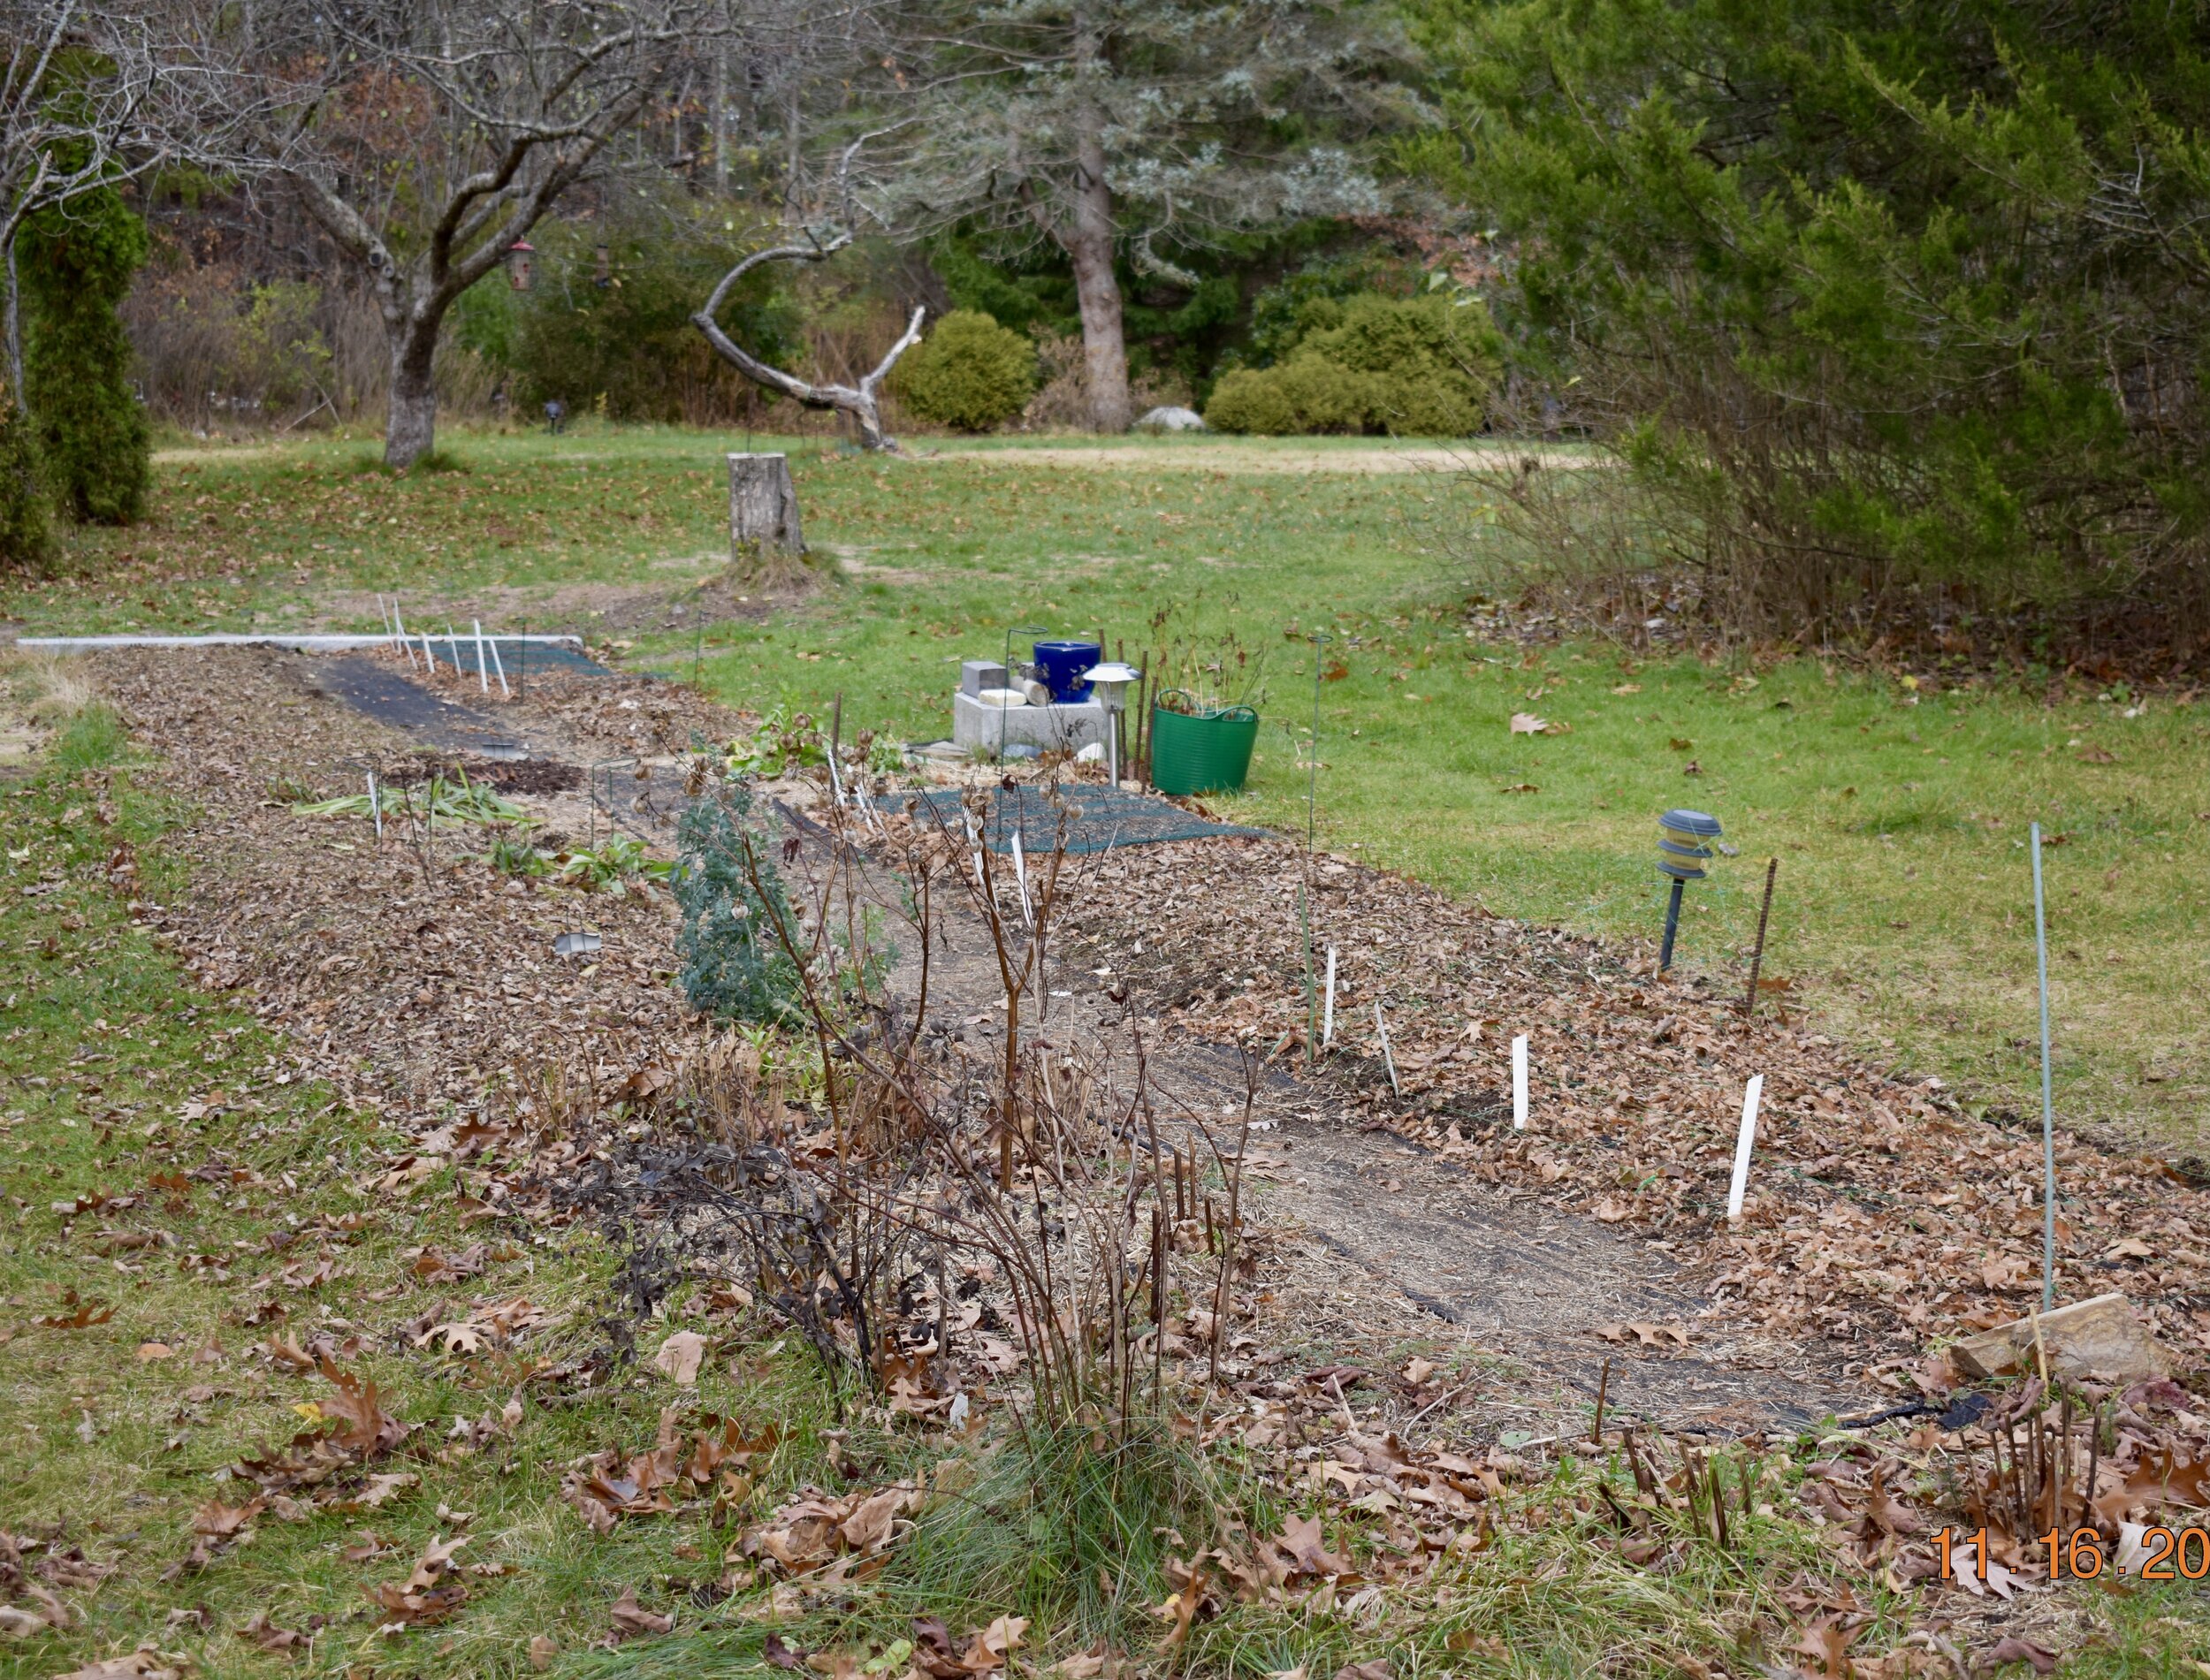 Garden mulched and tucked away  for the winter.